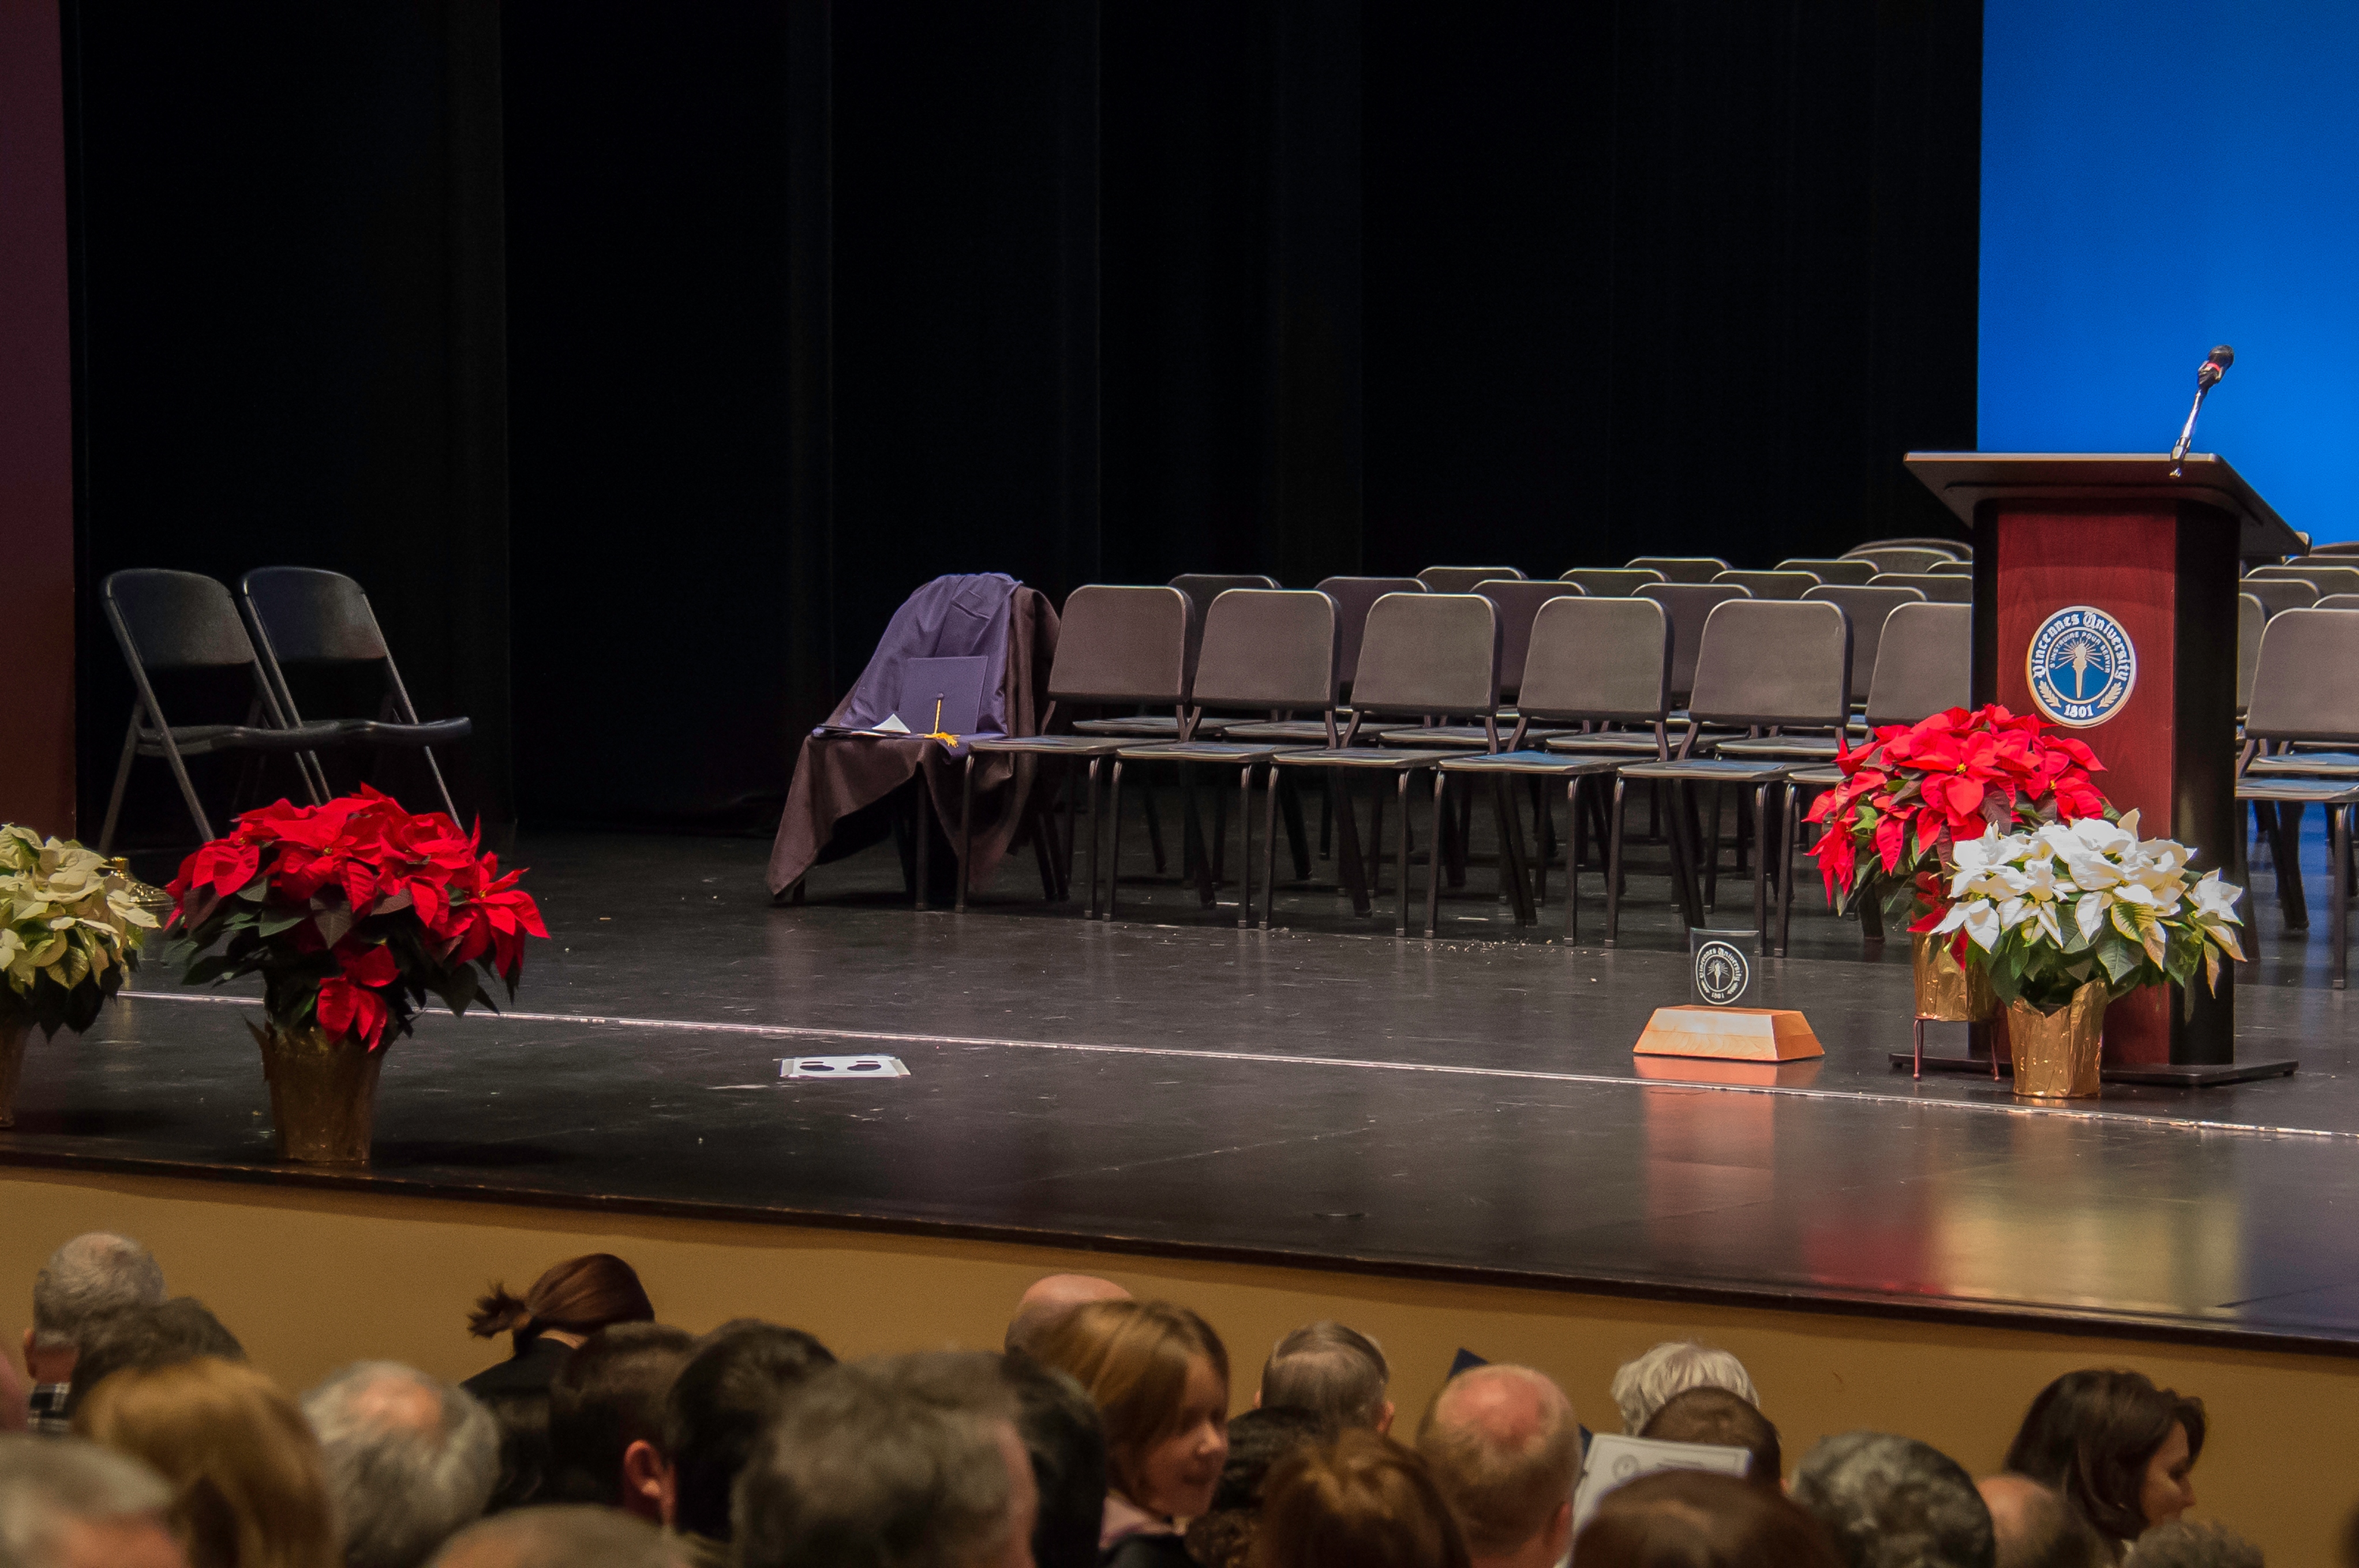 Photo of chairs, degree holder, flowers and podium during Mid-Year Commencement on the Red Skelton Performing Arts Center statge